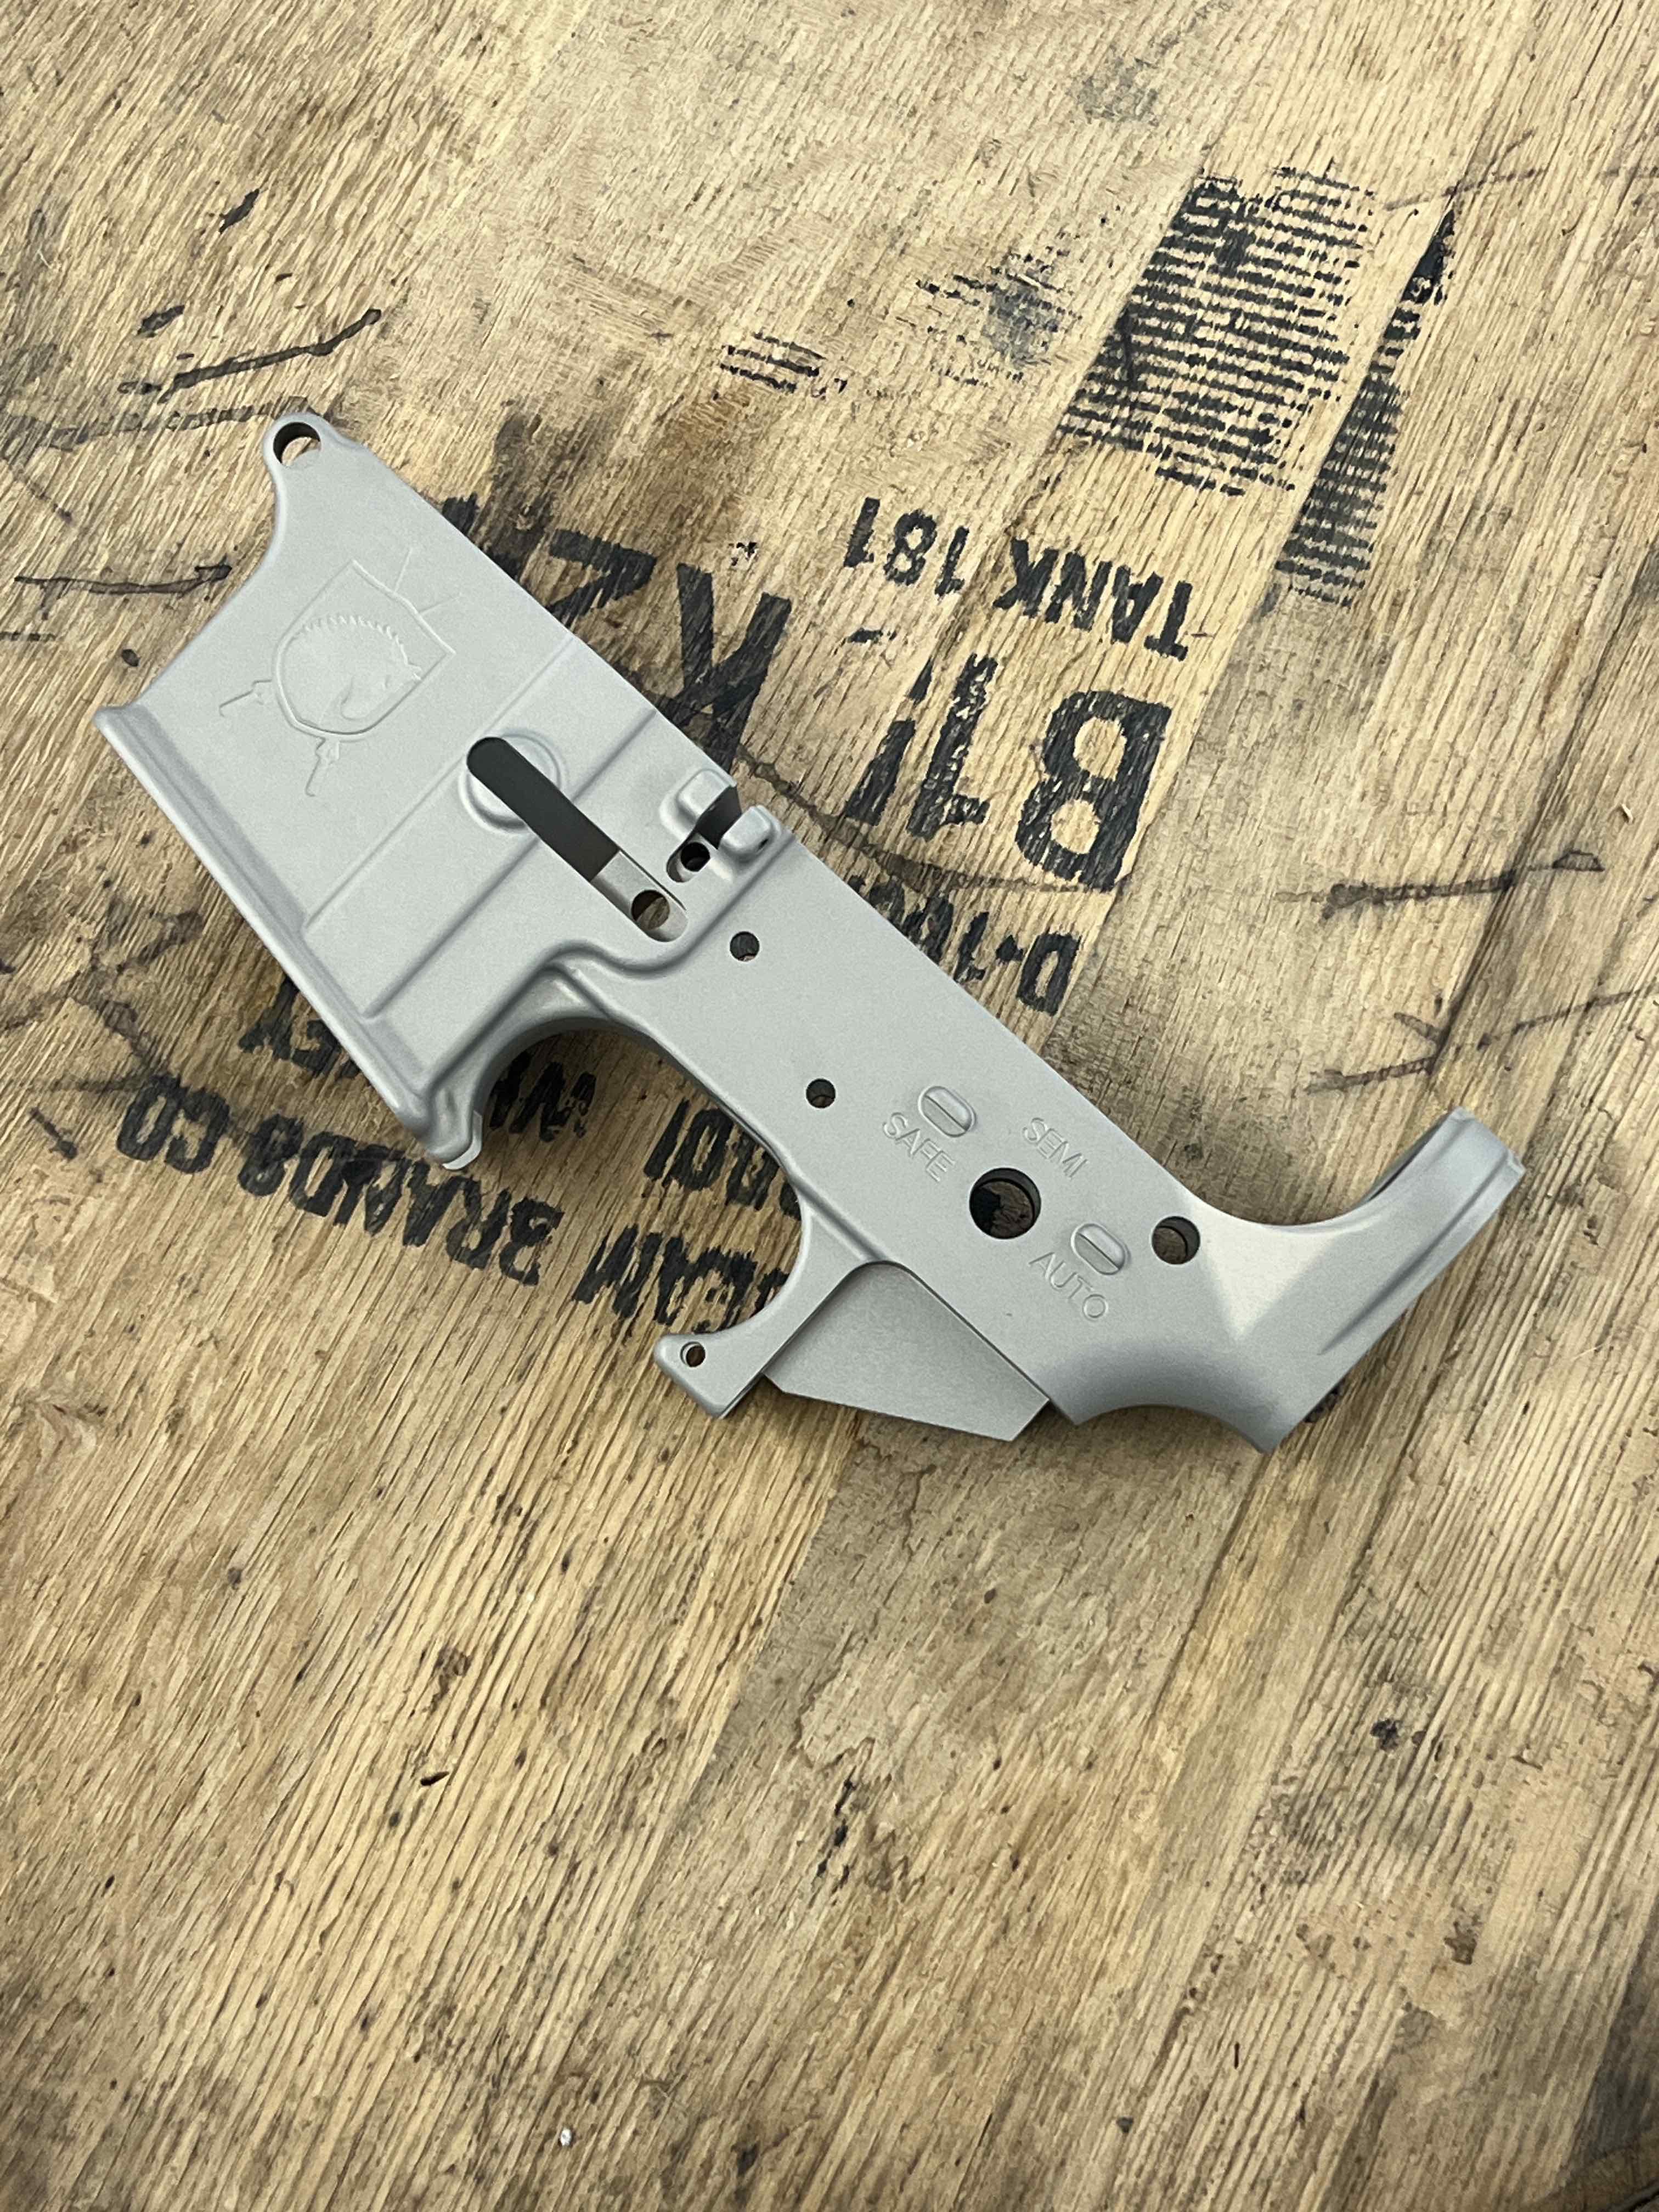 Thoroughbred Armament Co. TAC-15 AR-15 Lower Receiver - CLEAR